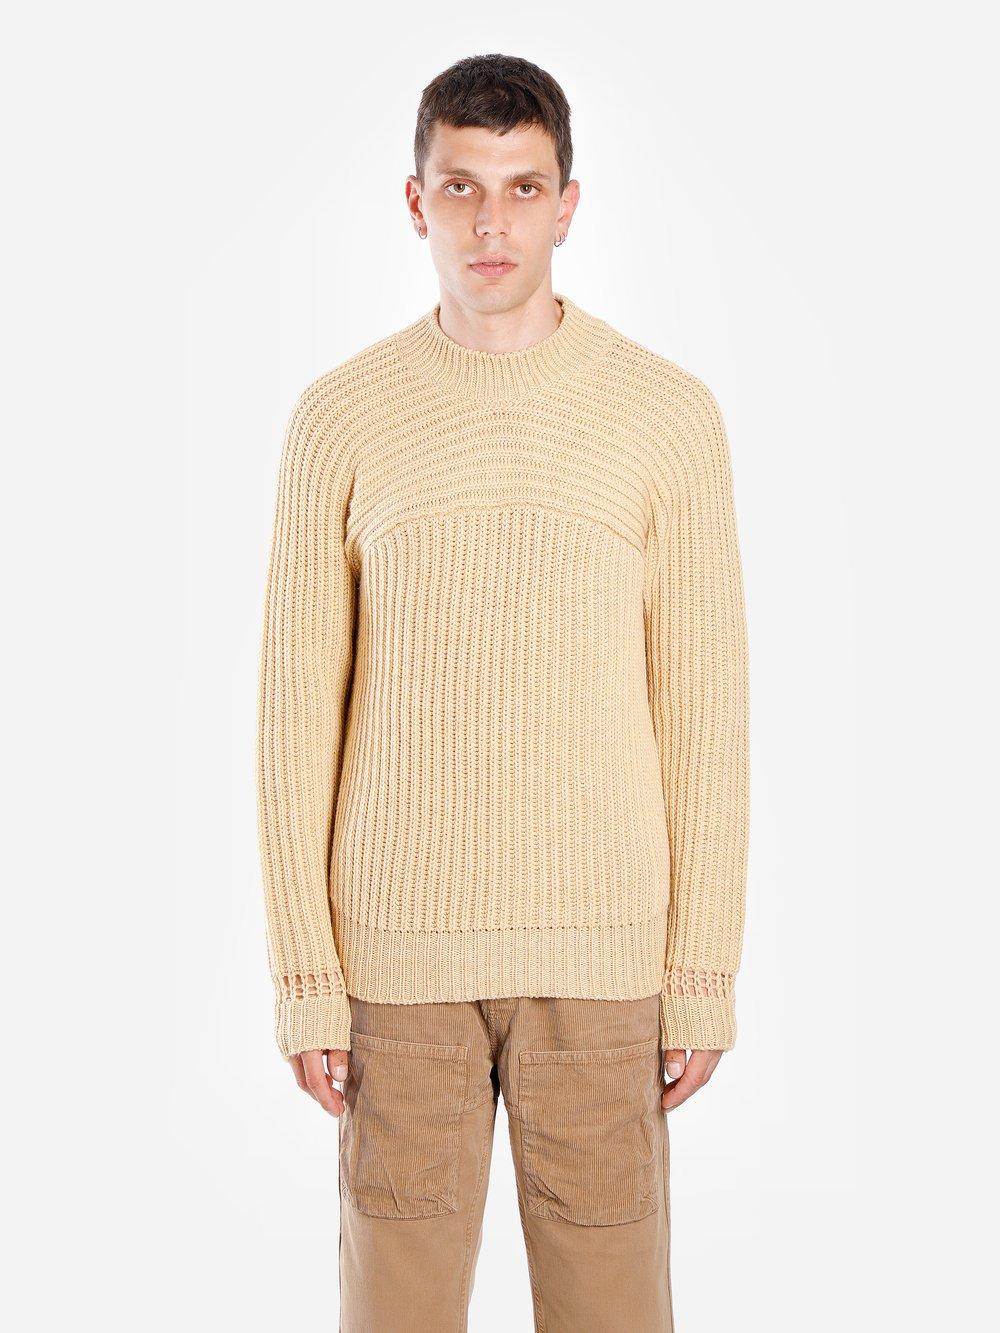 Jacquemus Wool Knitwear in Yellow for Men - Lyst